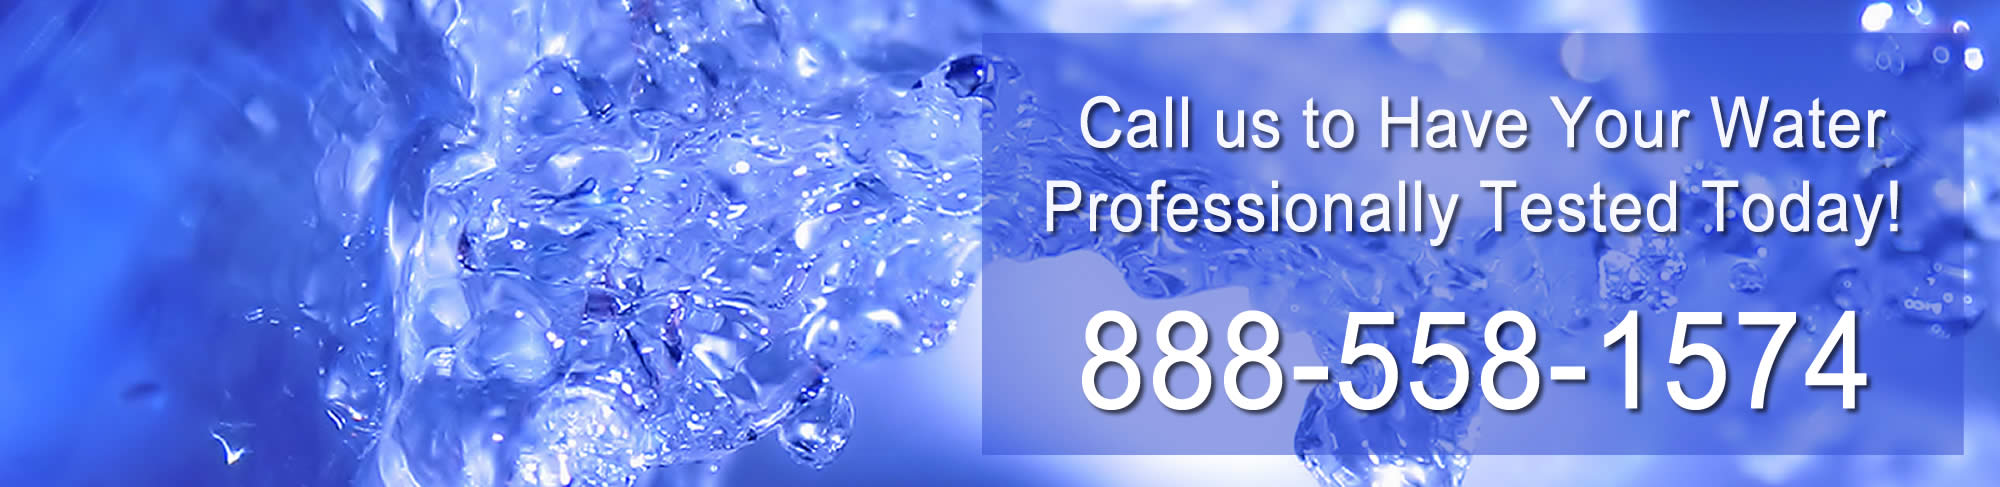 Specializing in Westbrook CT Water Testing and Analysis